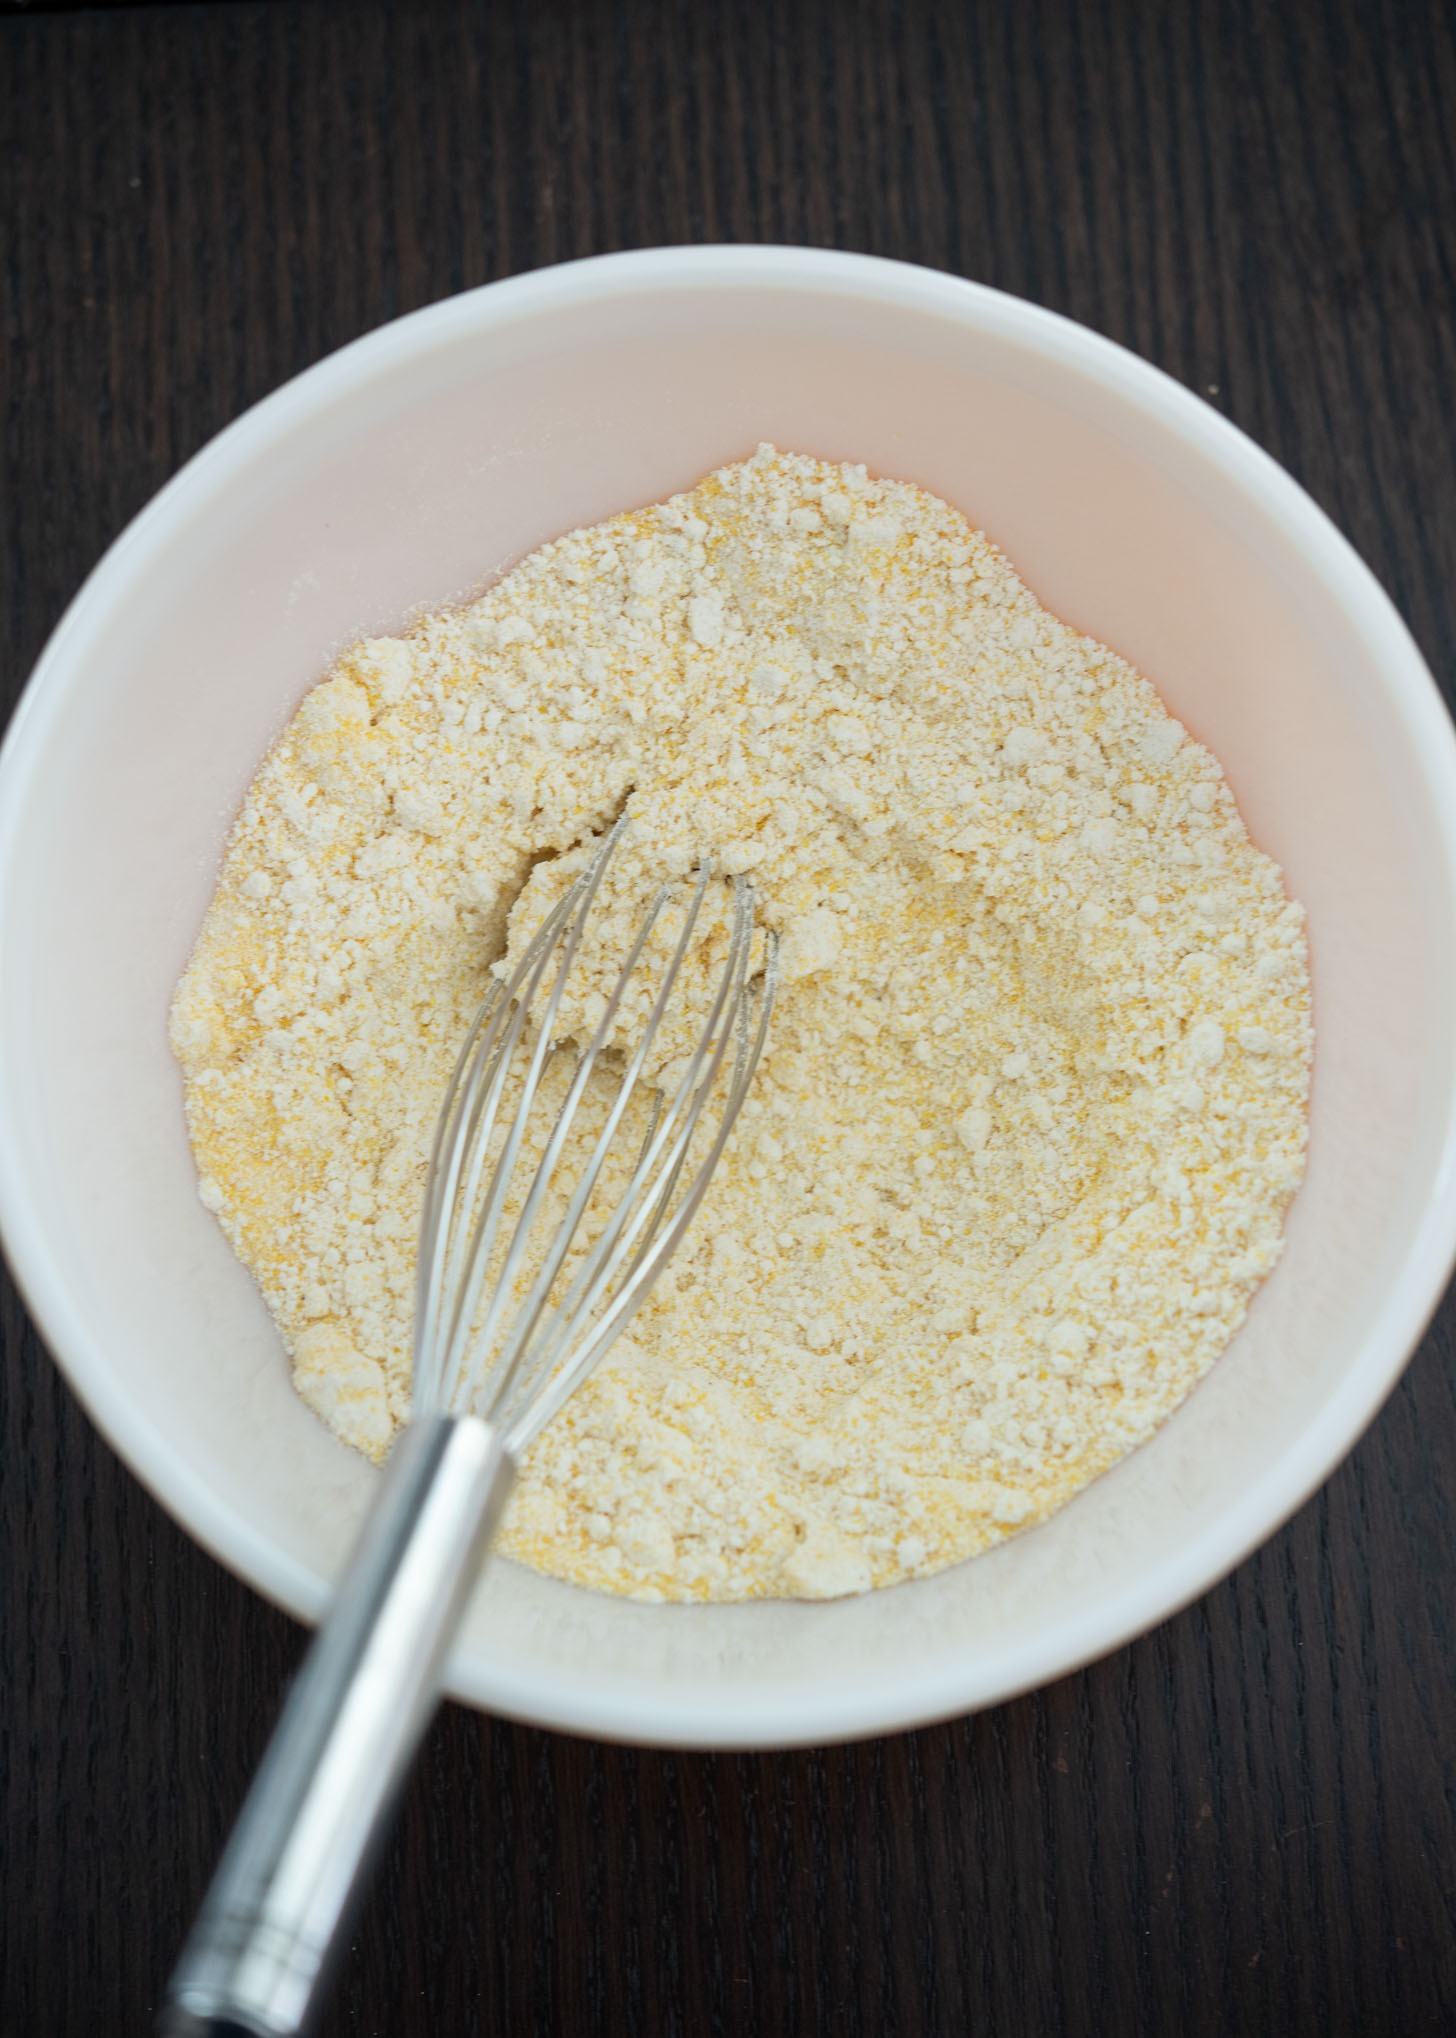 Pancake mix and cornmeal combined to make Korean egg bread batter.